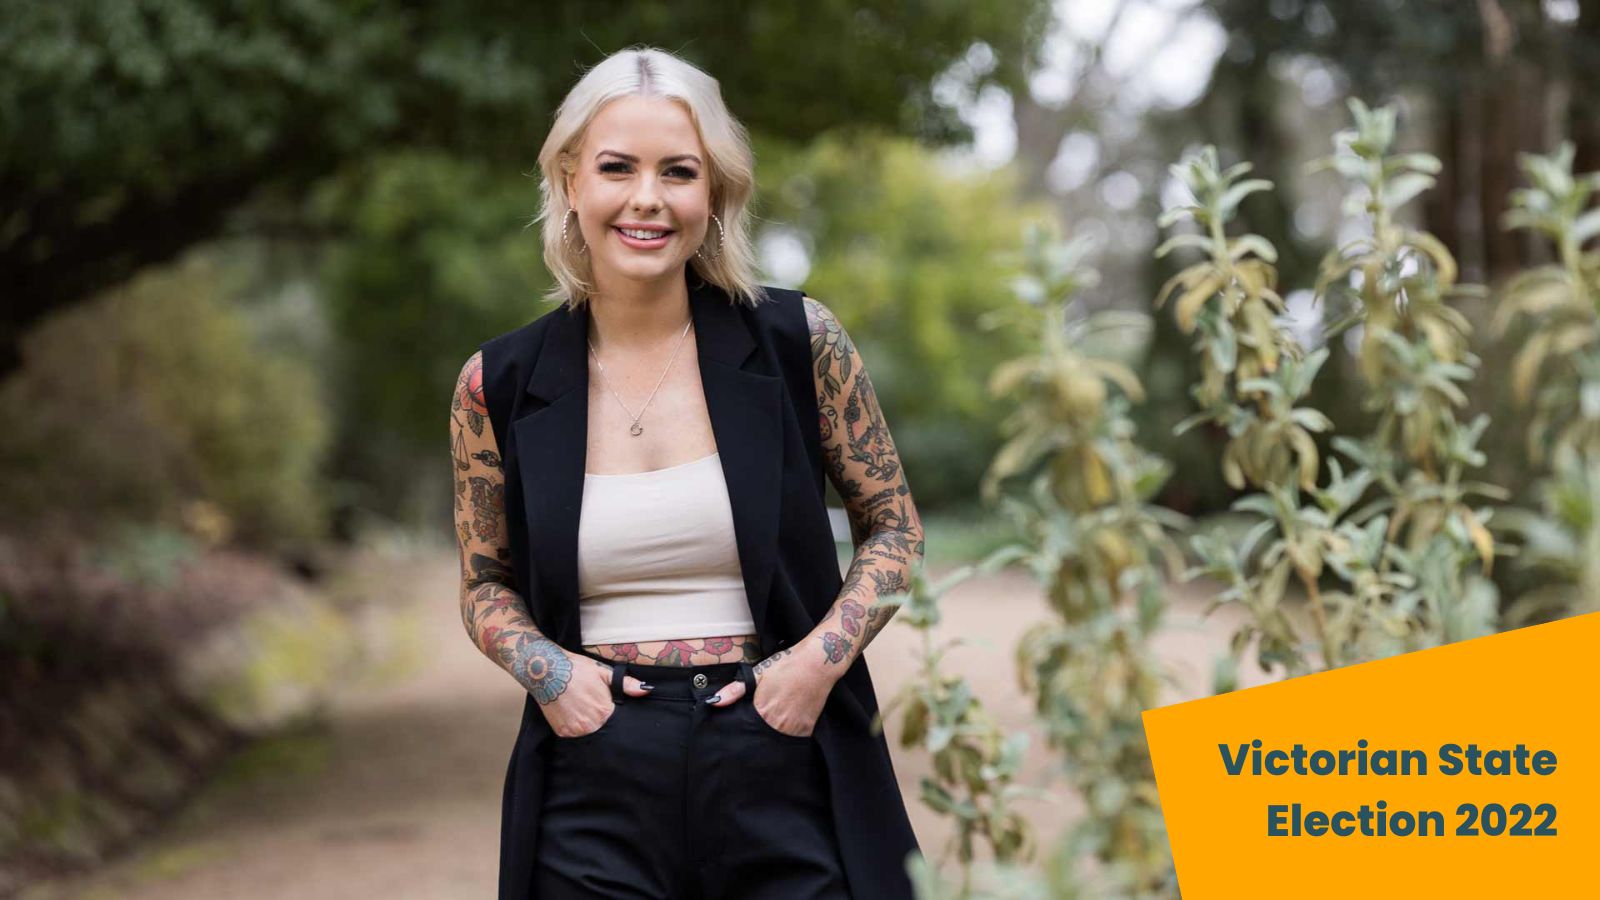 Photo of Georgie Purcell smiling, sowing off tattoos on her arms. Overlaid text reads, "Victorian State election 2022"